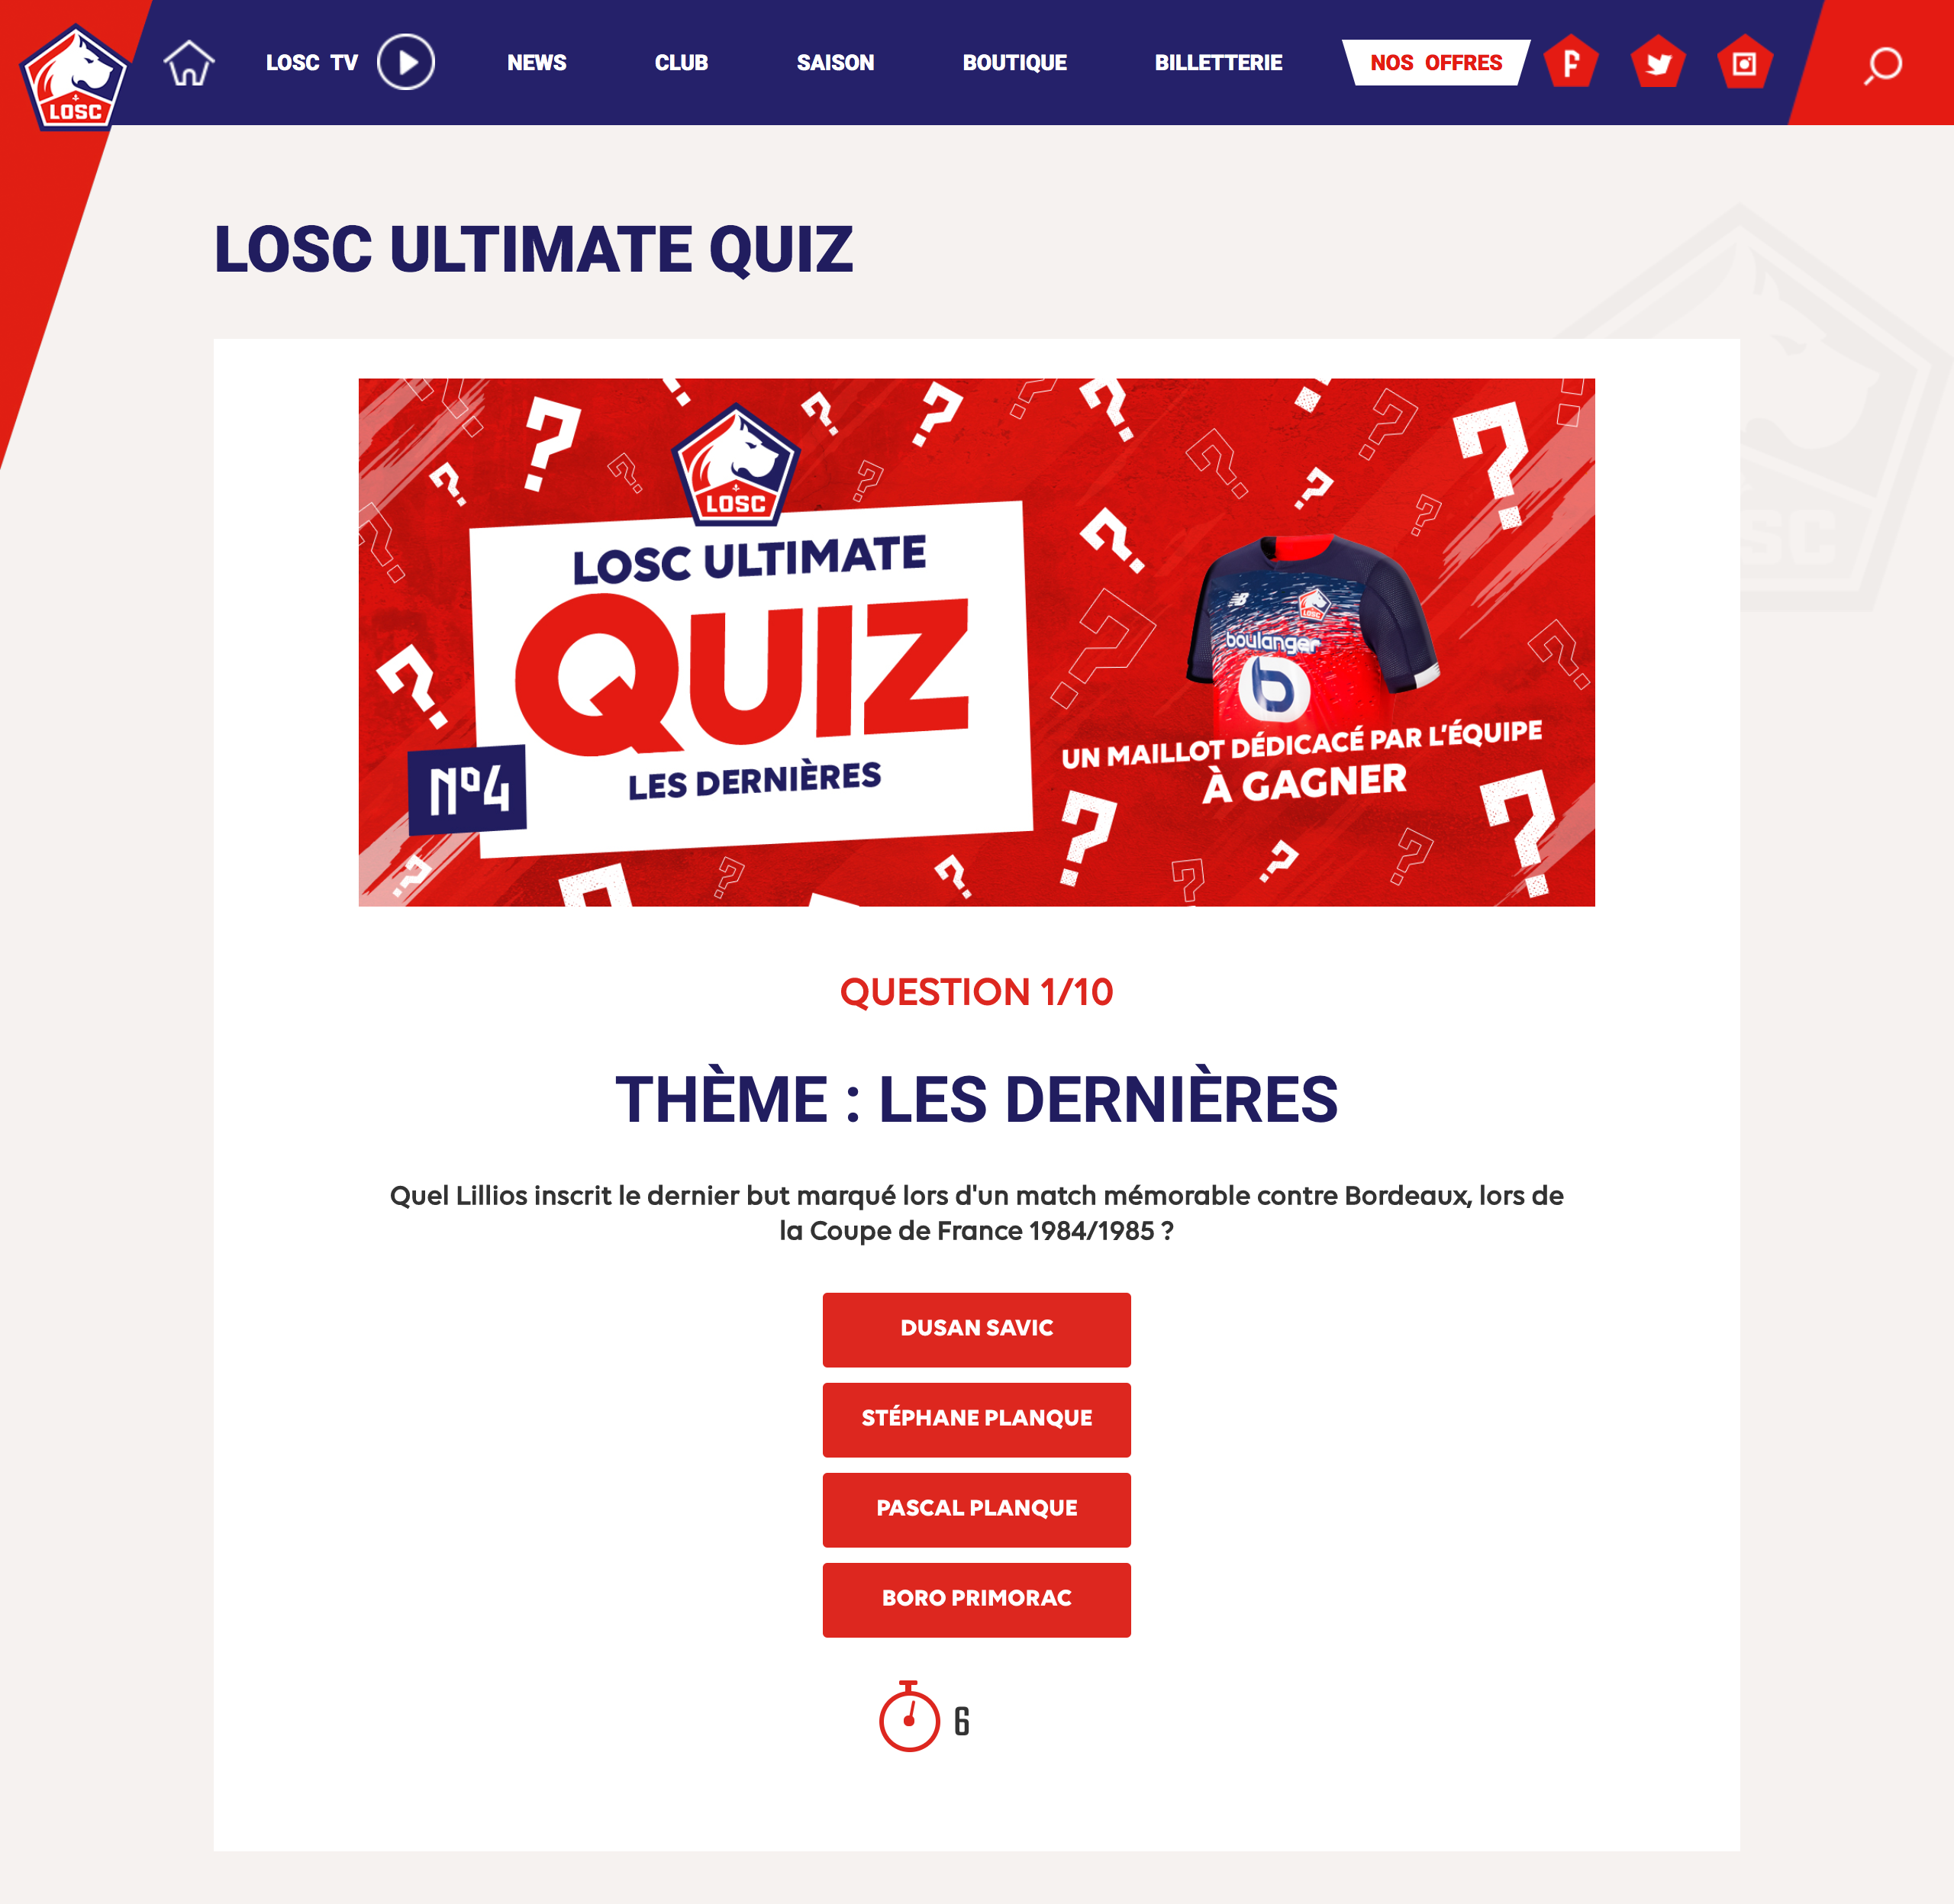 mays-best-interactive-marketing-campaigns-covid-19-losc